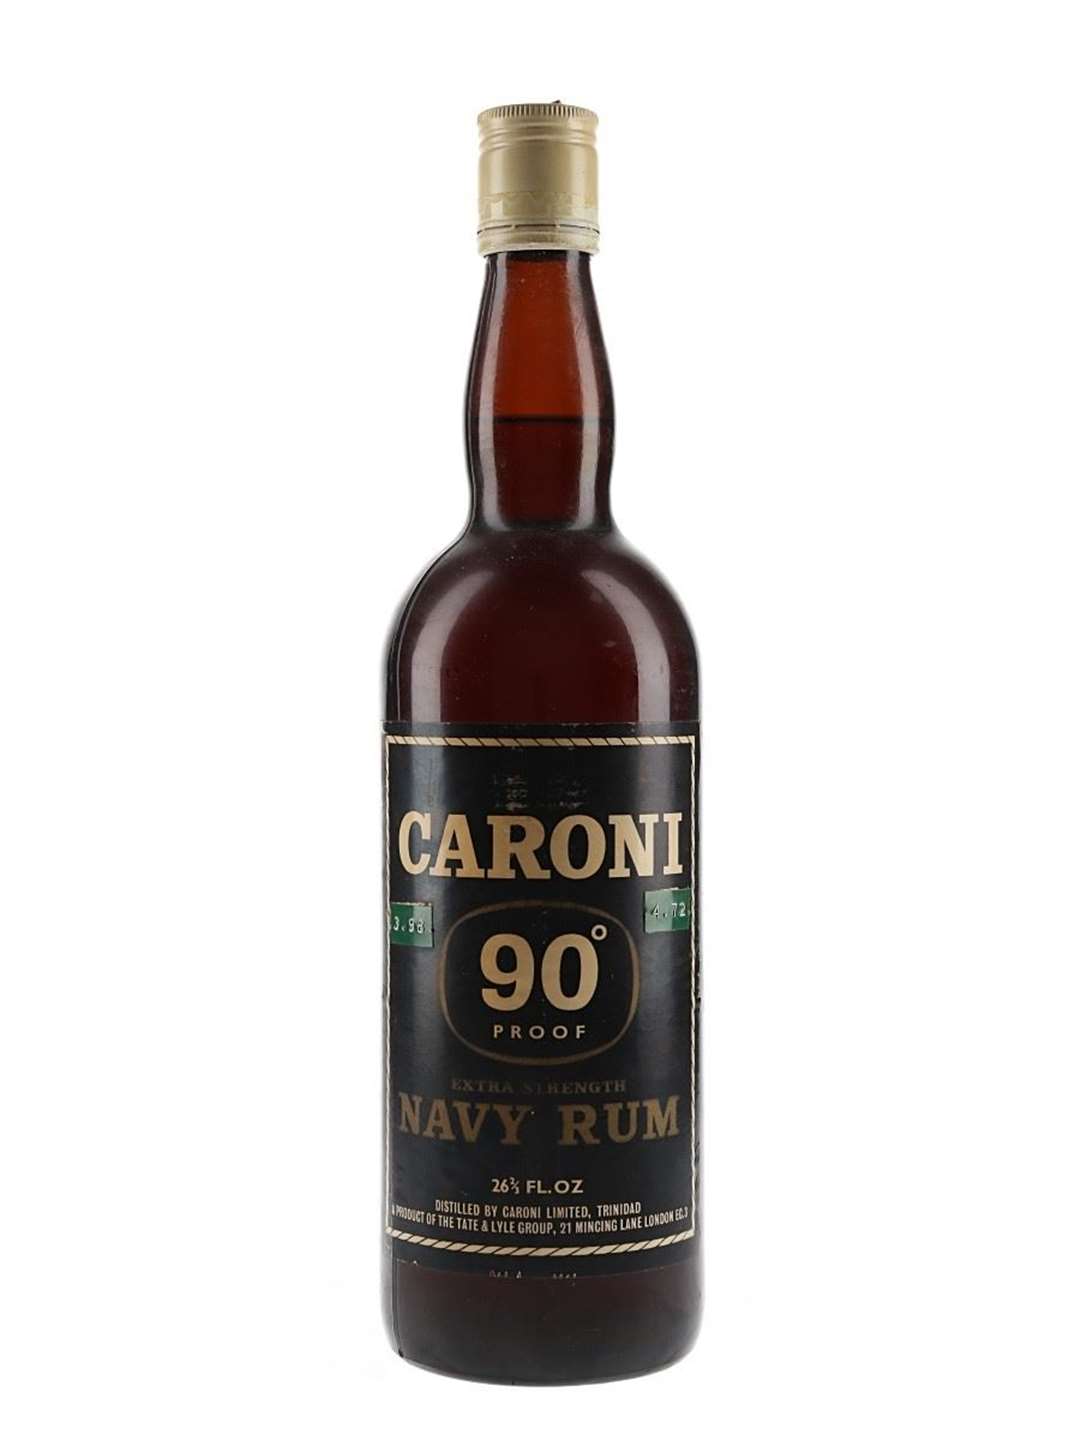 A Caroni 90 proof Extra Strength Navy Rum went for £1,800. Image from whisky.auction